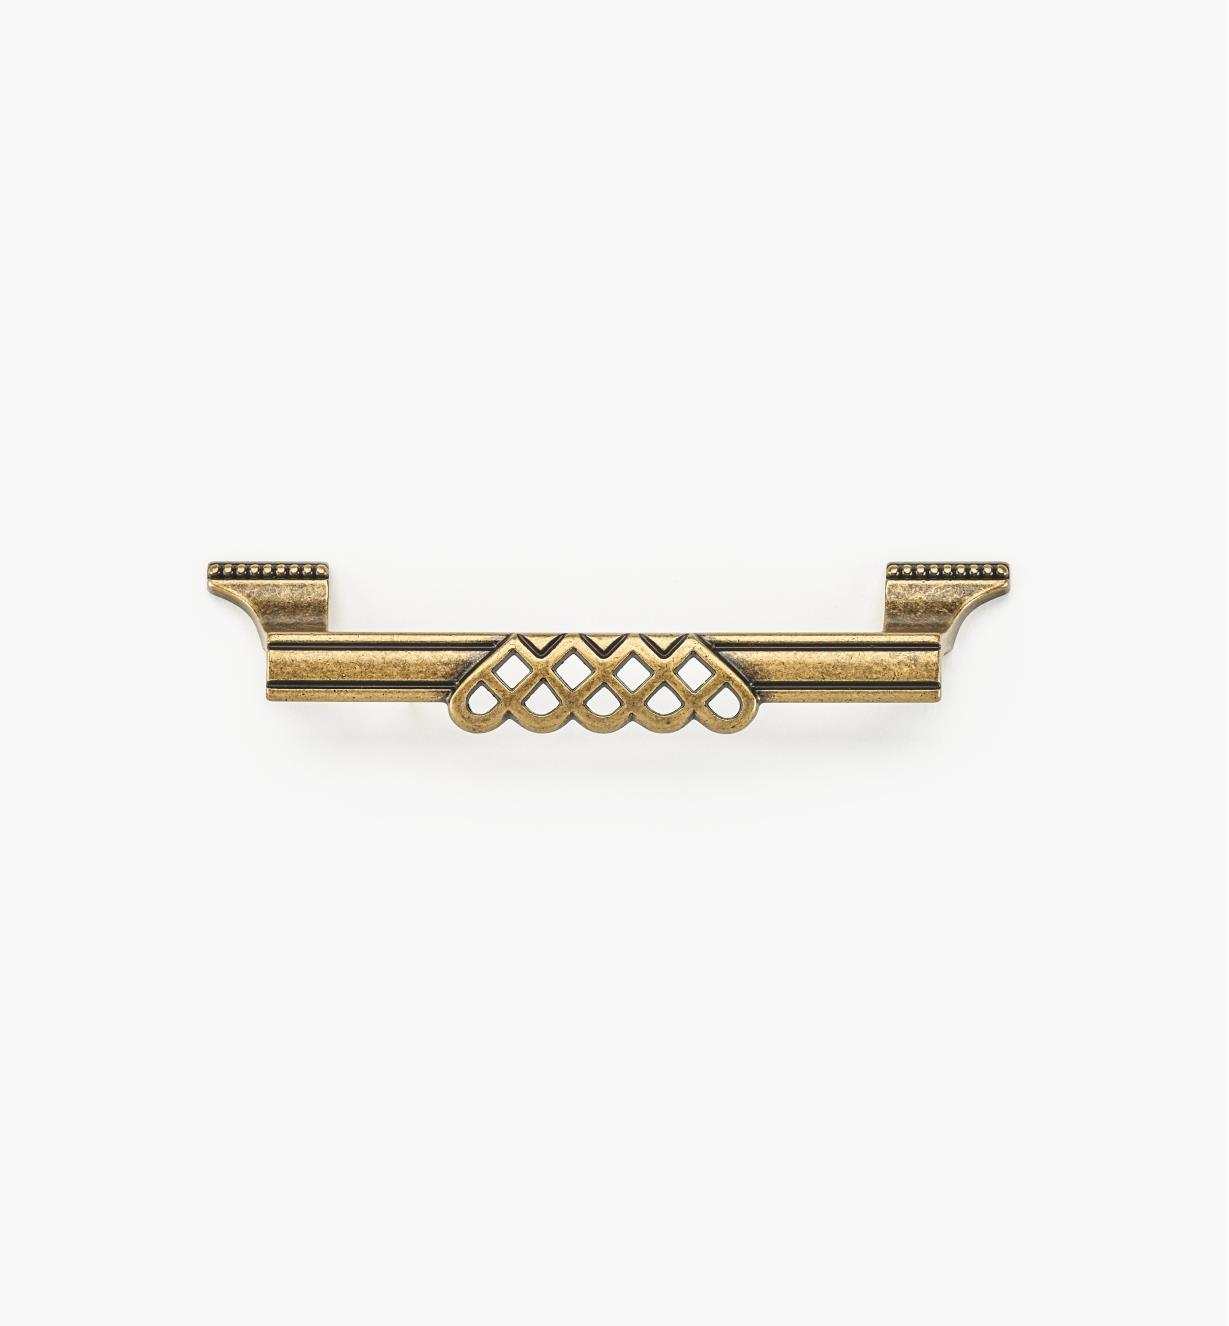 01A3014 - 6 3/8" (128mm) Lattice and Bead Handle